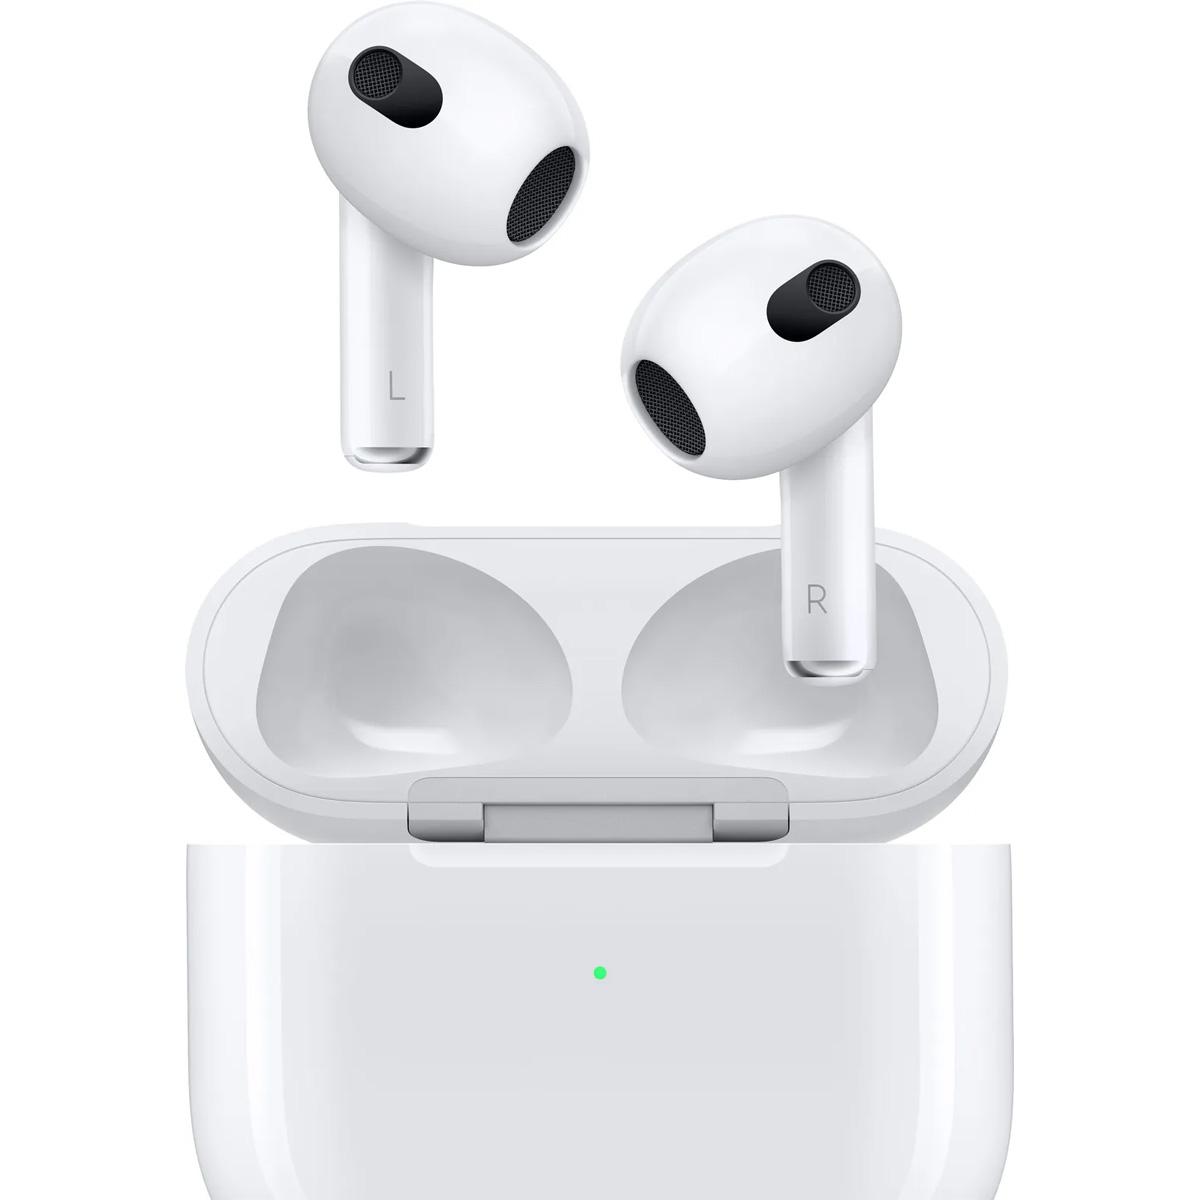 Apple AirPods 3rd Gen Refurbished Earphones for $99.99 Shipped